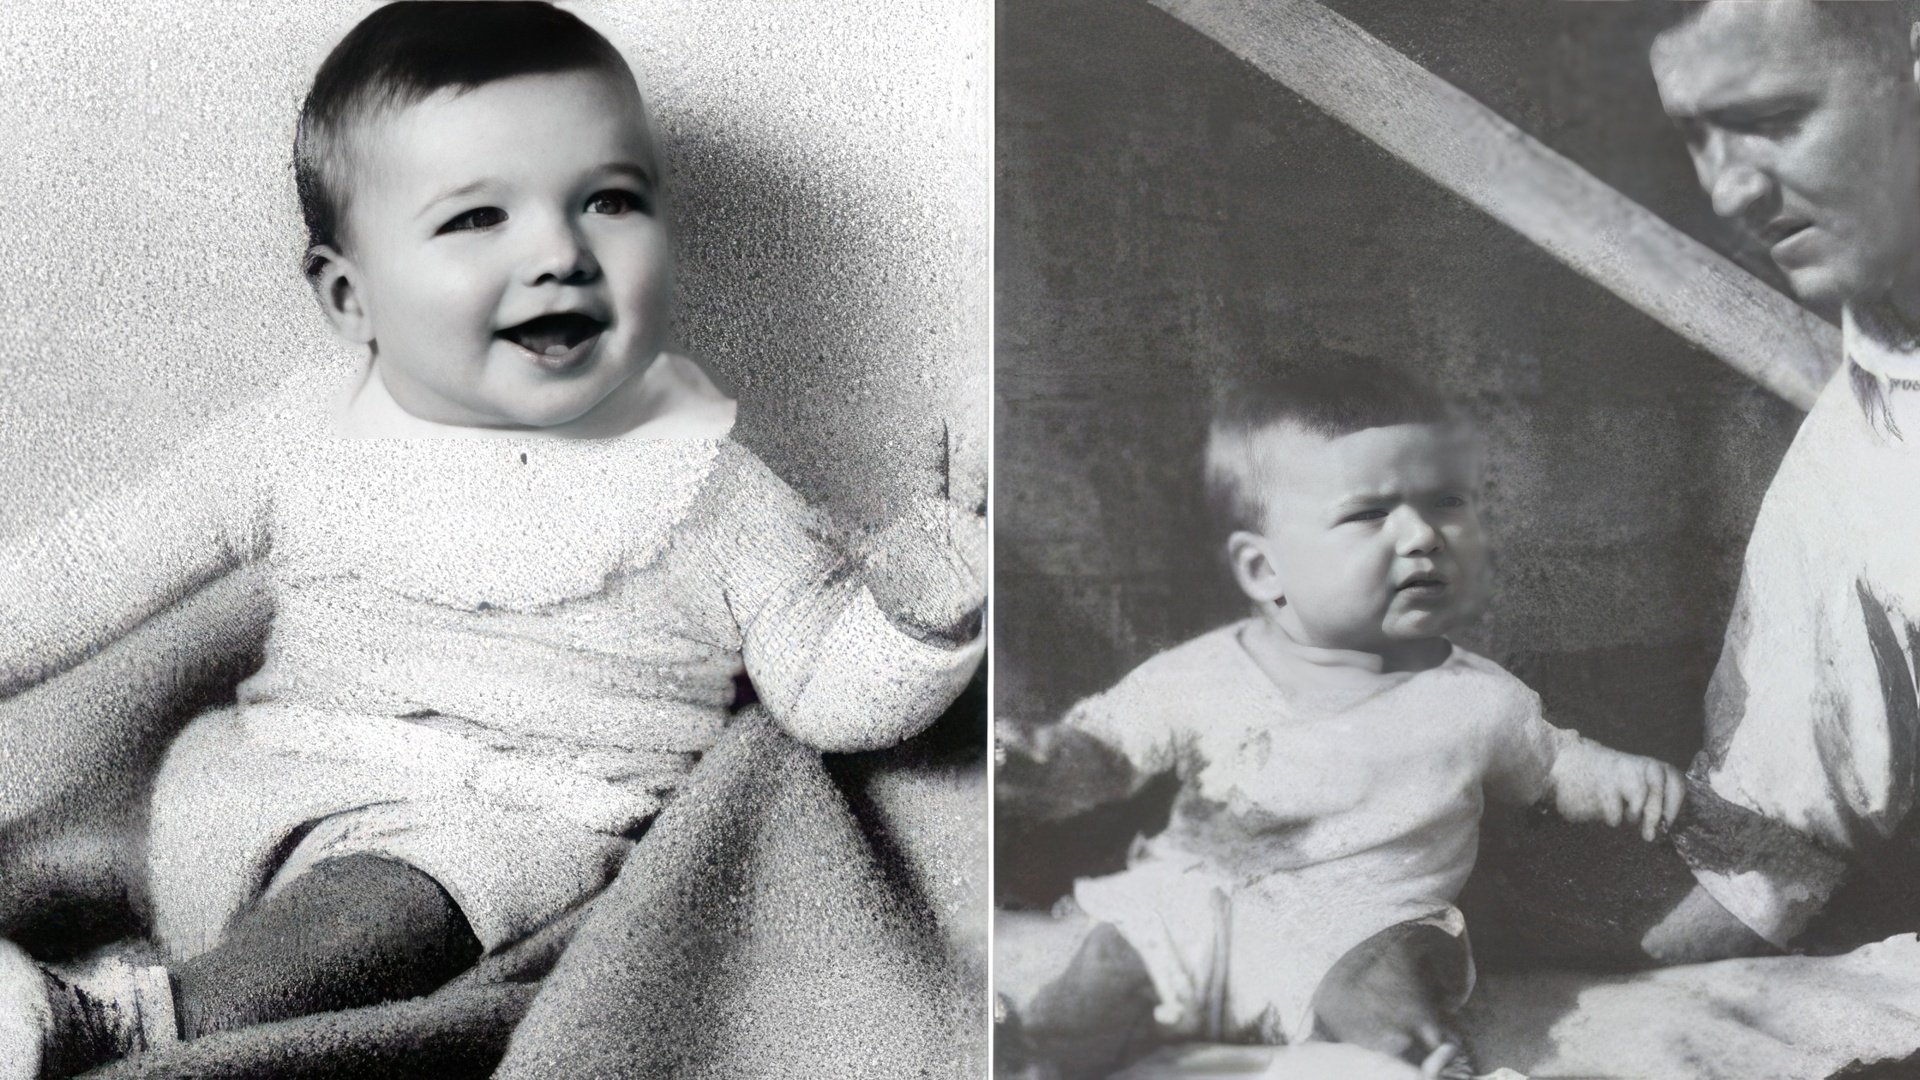 Clint Eastwood in childhood (from the right with his father in the photo)